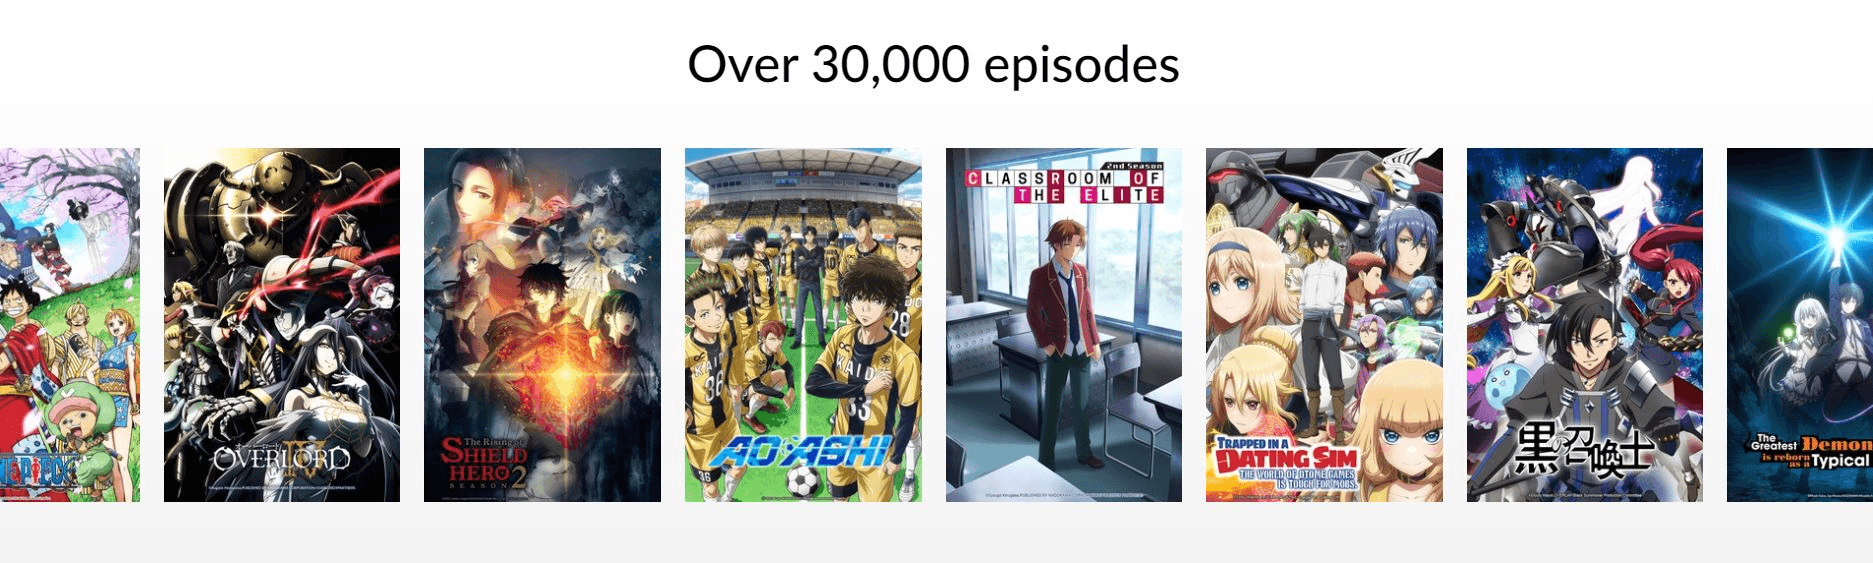 Crunchyroll has over 30,000 titles in its library of anime content.